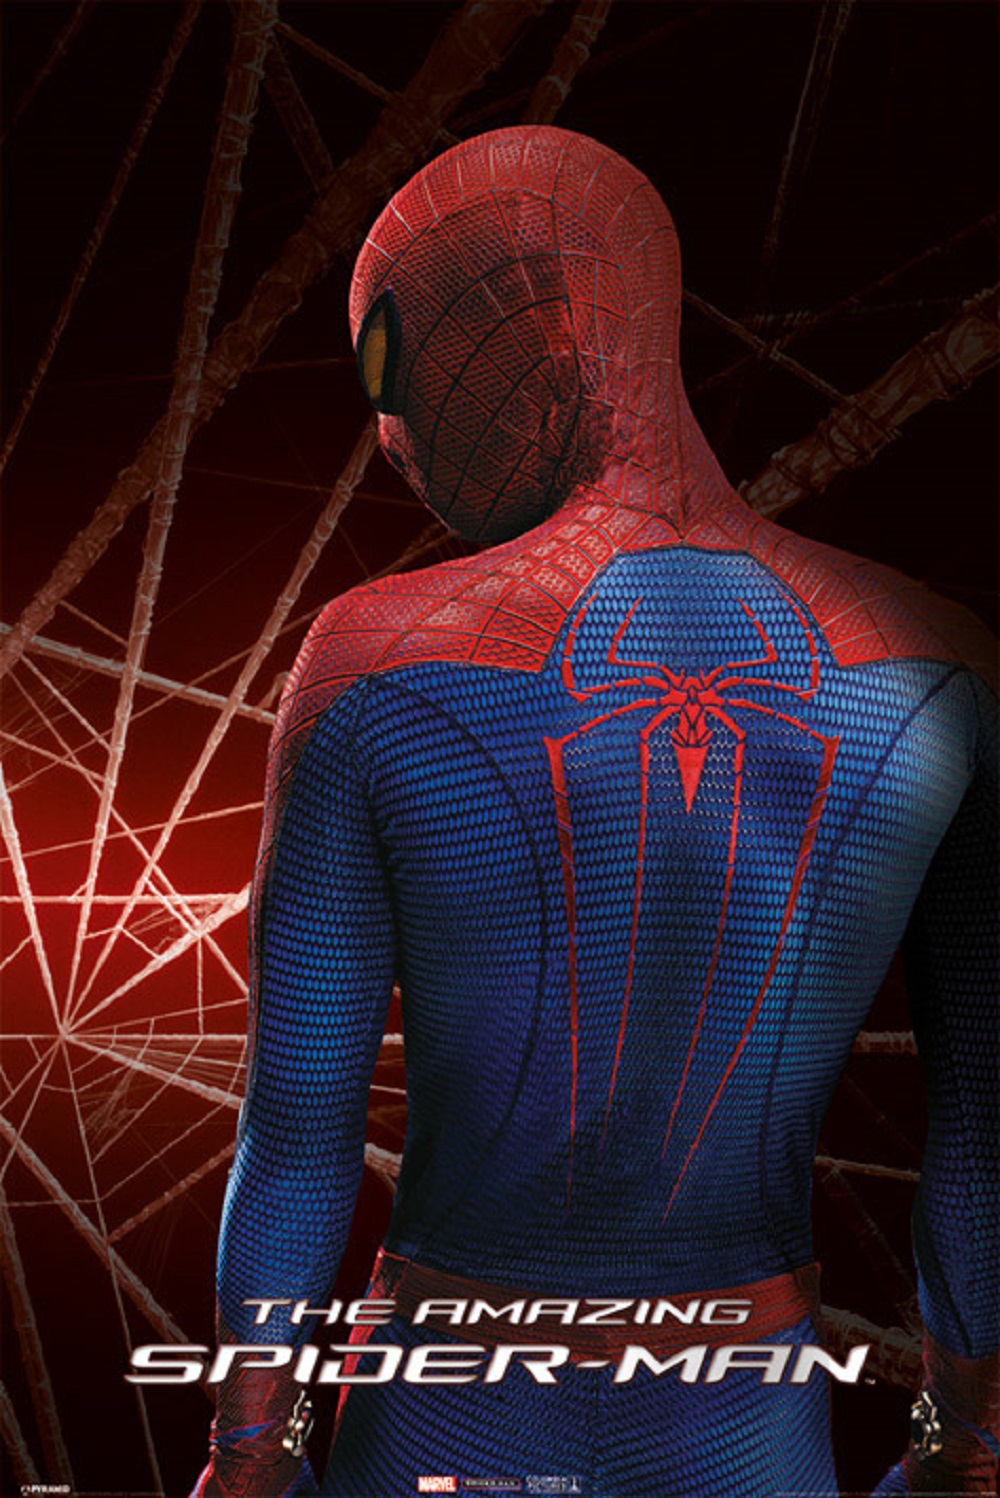 THE AMAZING SPIDERMAN Poster Back 61 x 91 cm